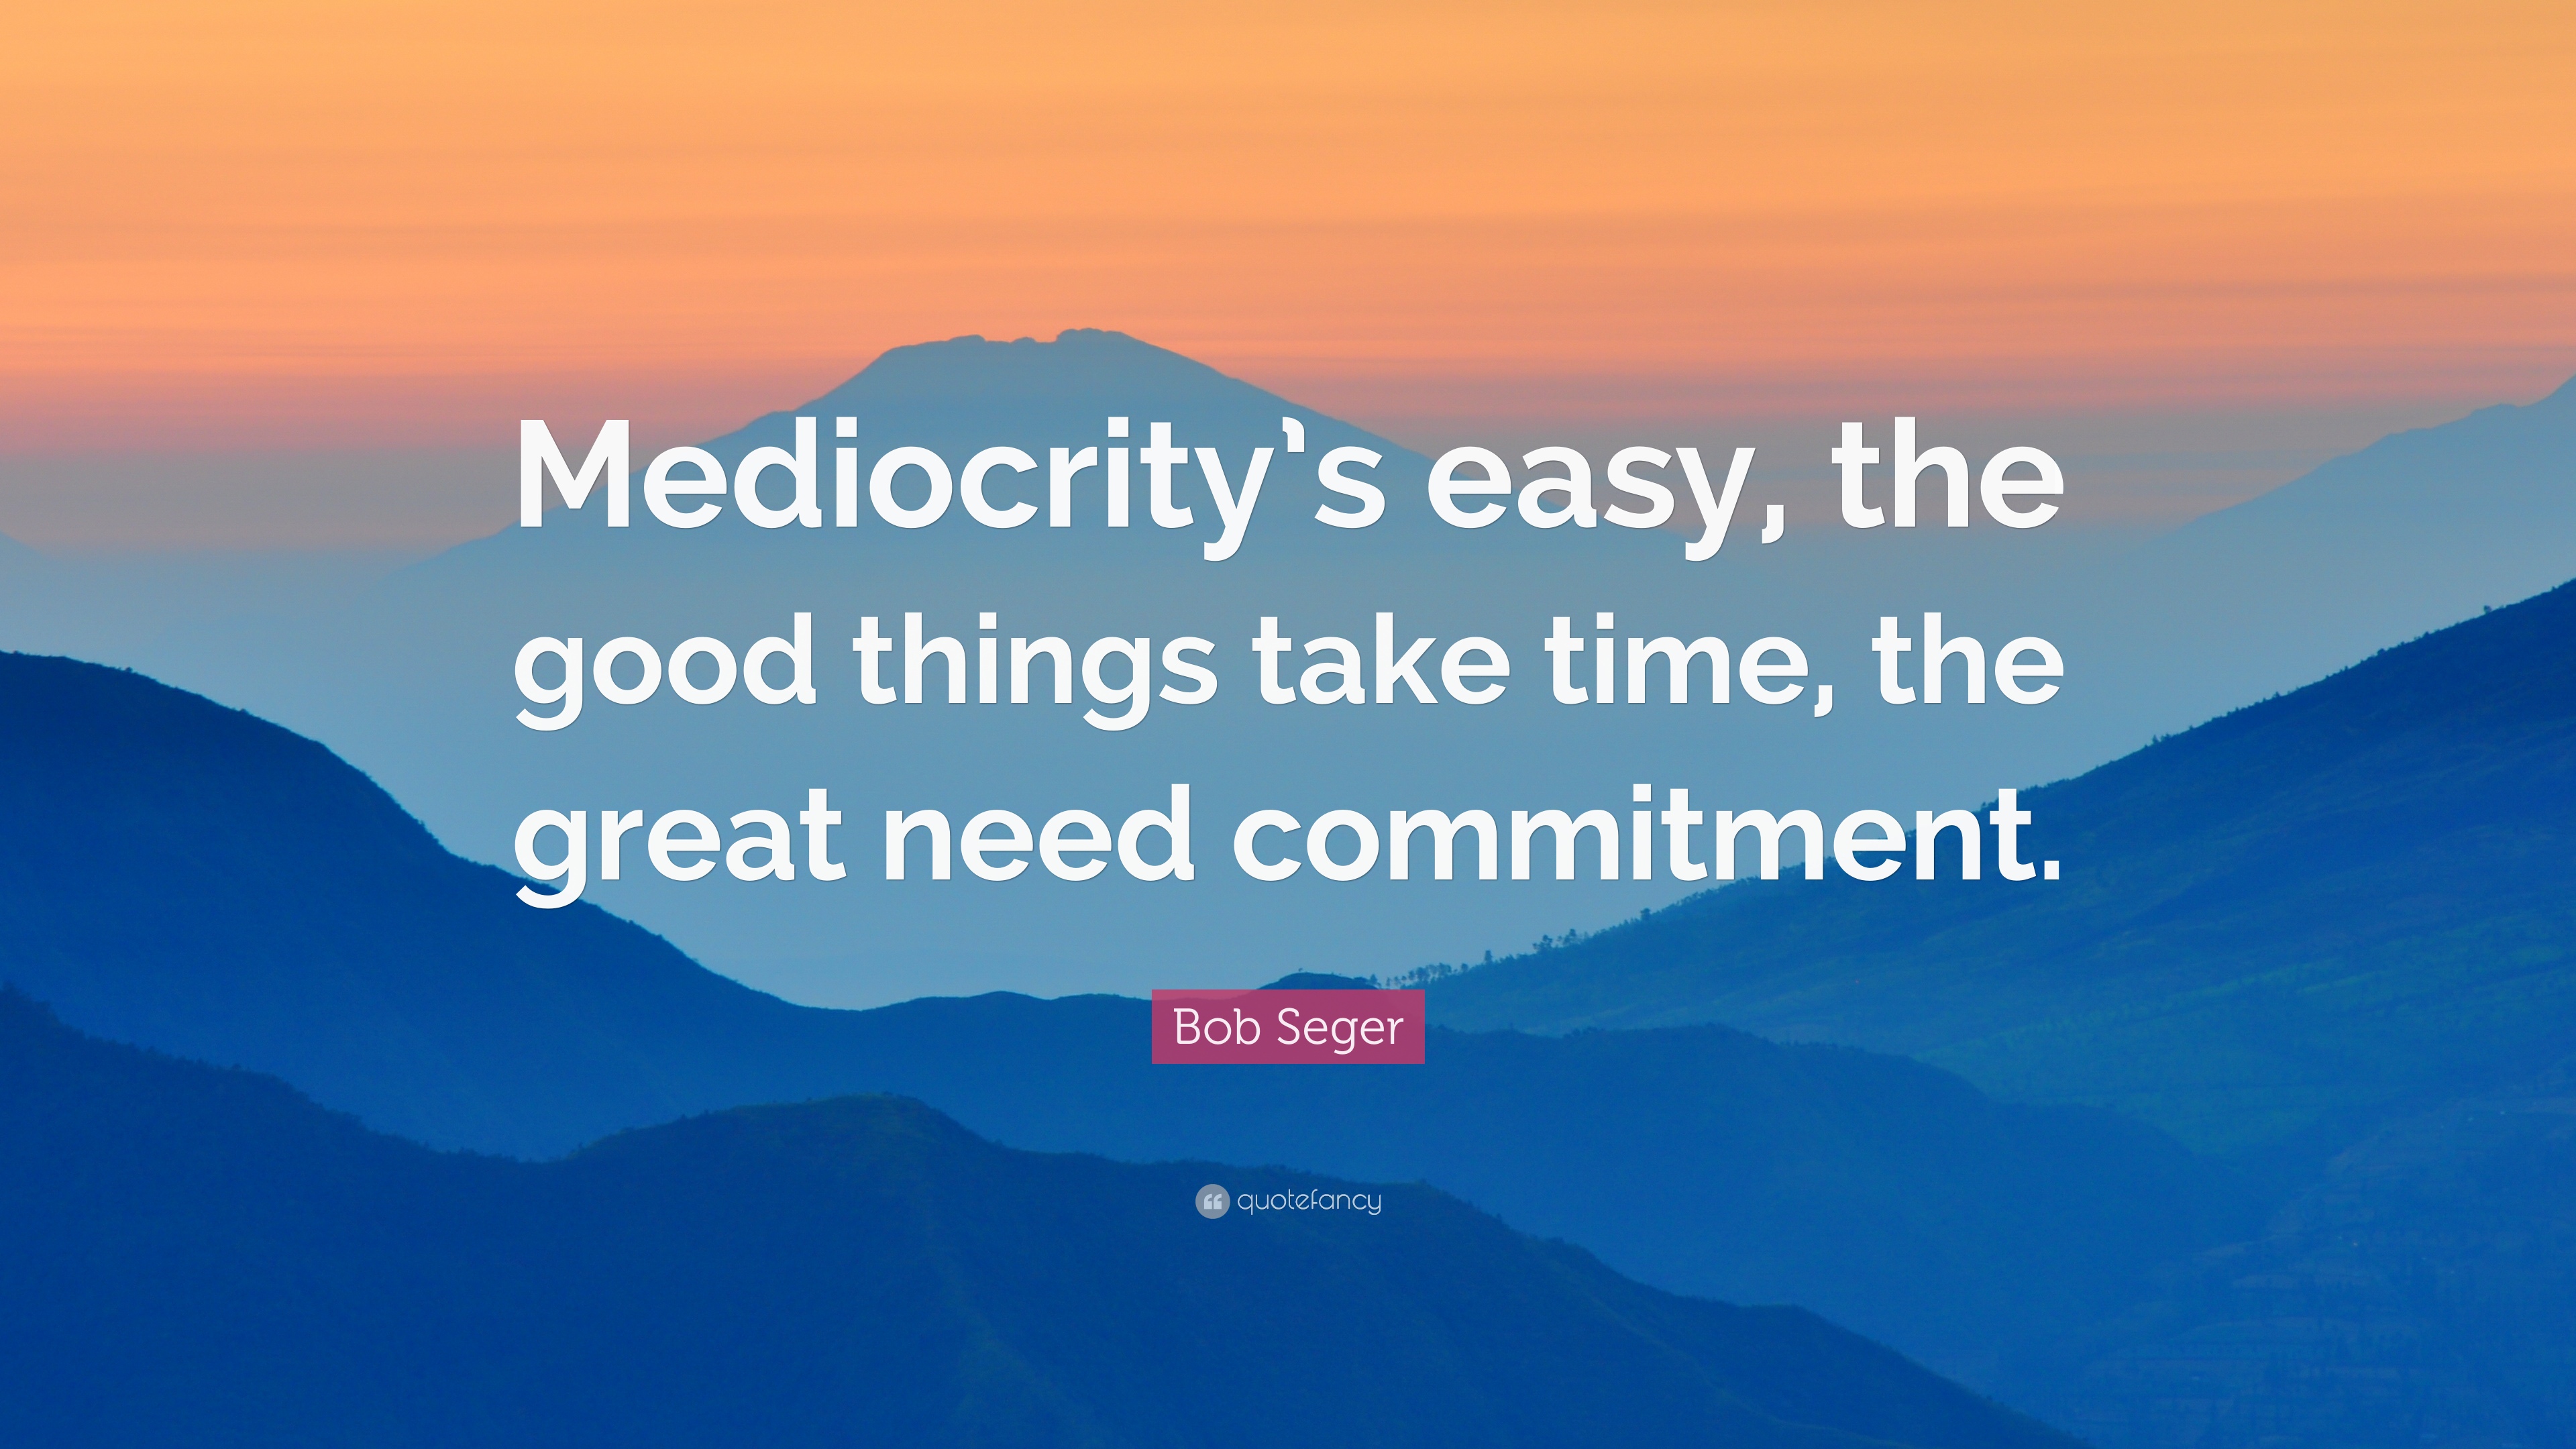 Bob Seger Quote: “Mediocrity's easy, the good things take time